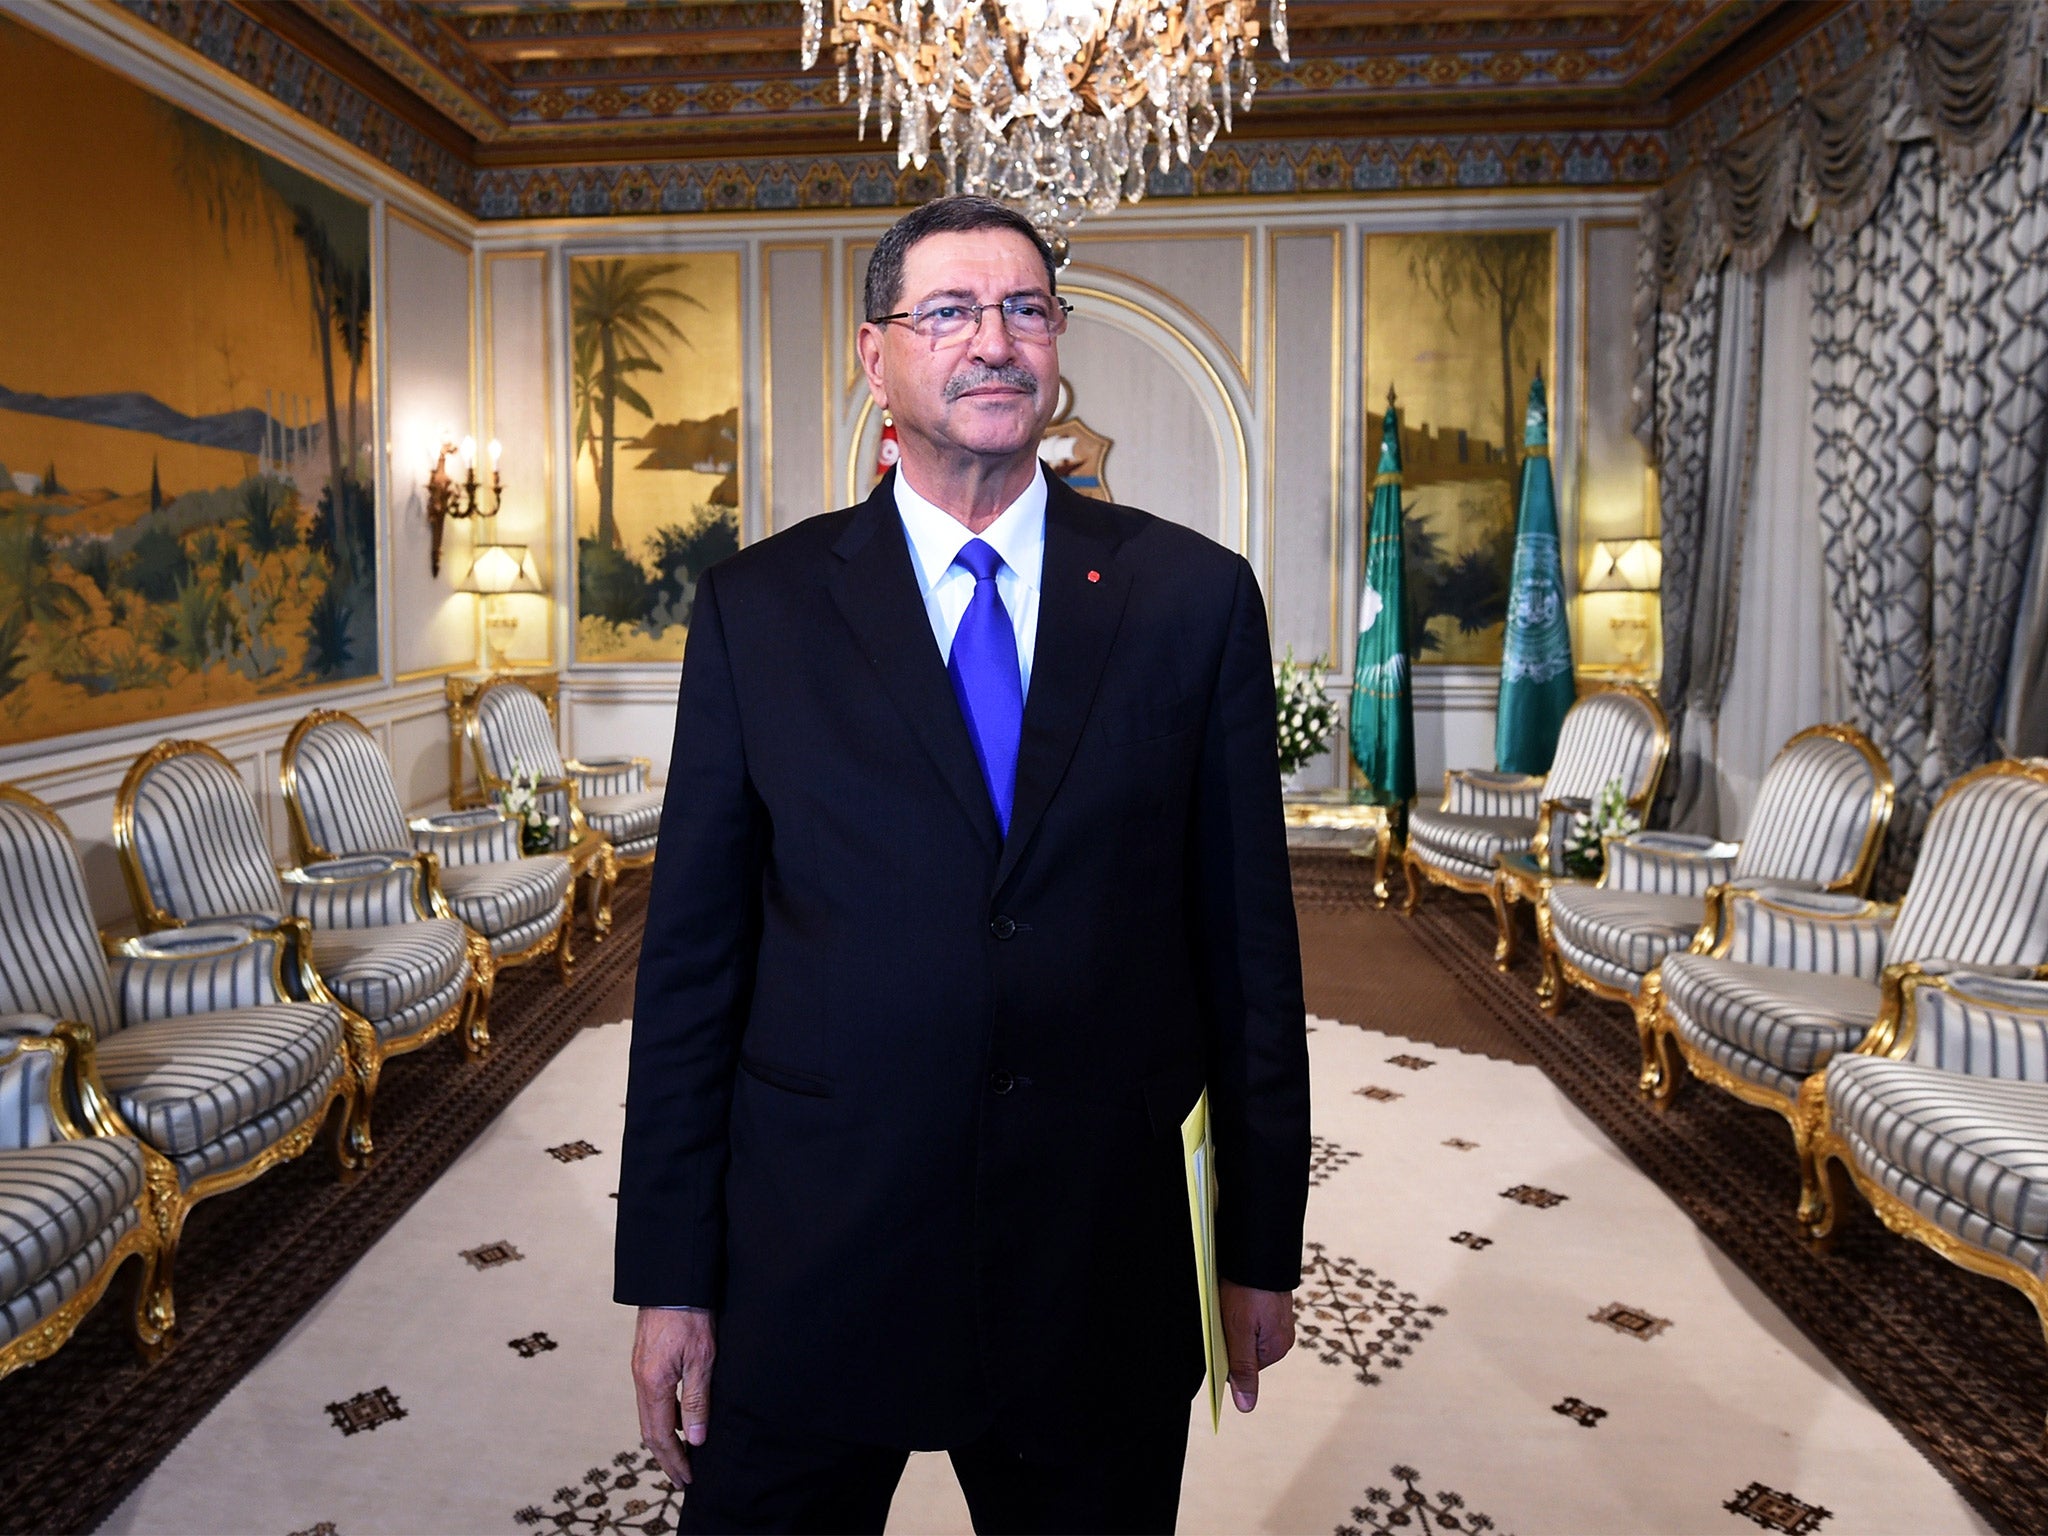 Tunisian Prime Minister Habib Essid says the authorities are working closely with Britain to trace terror networks